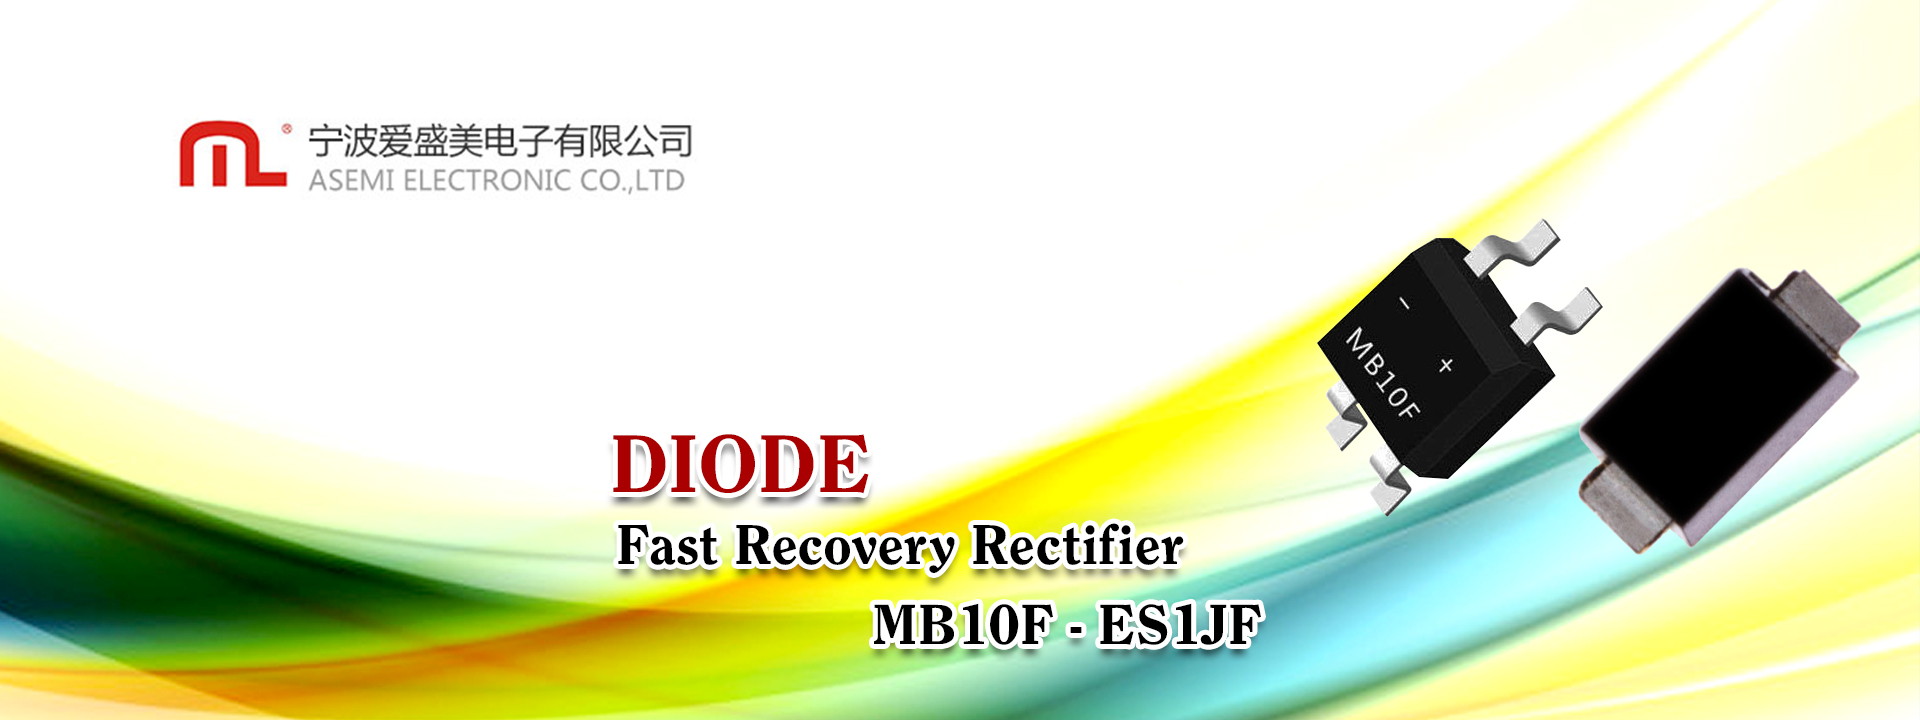 ASEMI - Diodes Fast Recovery Rectifier - MB10F - ES1JF